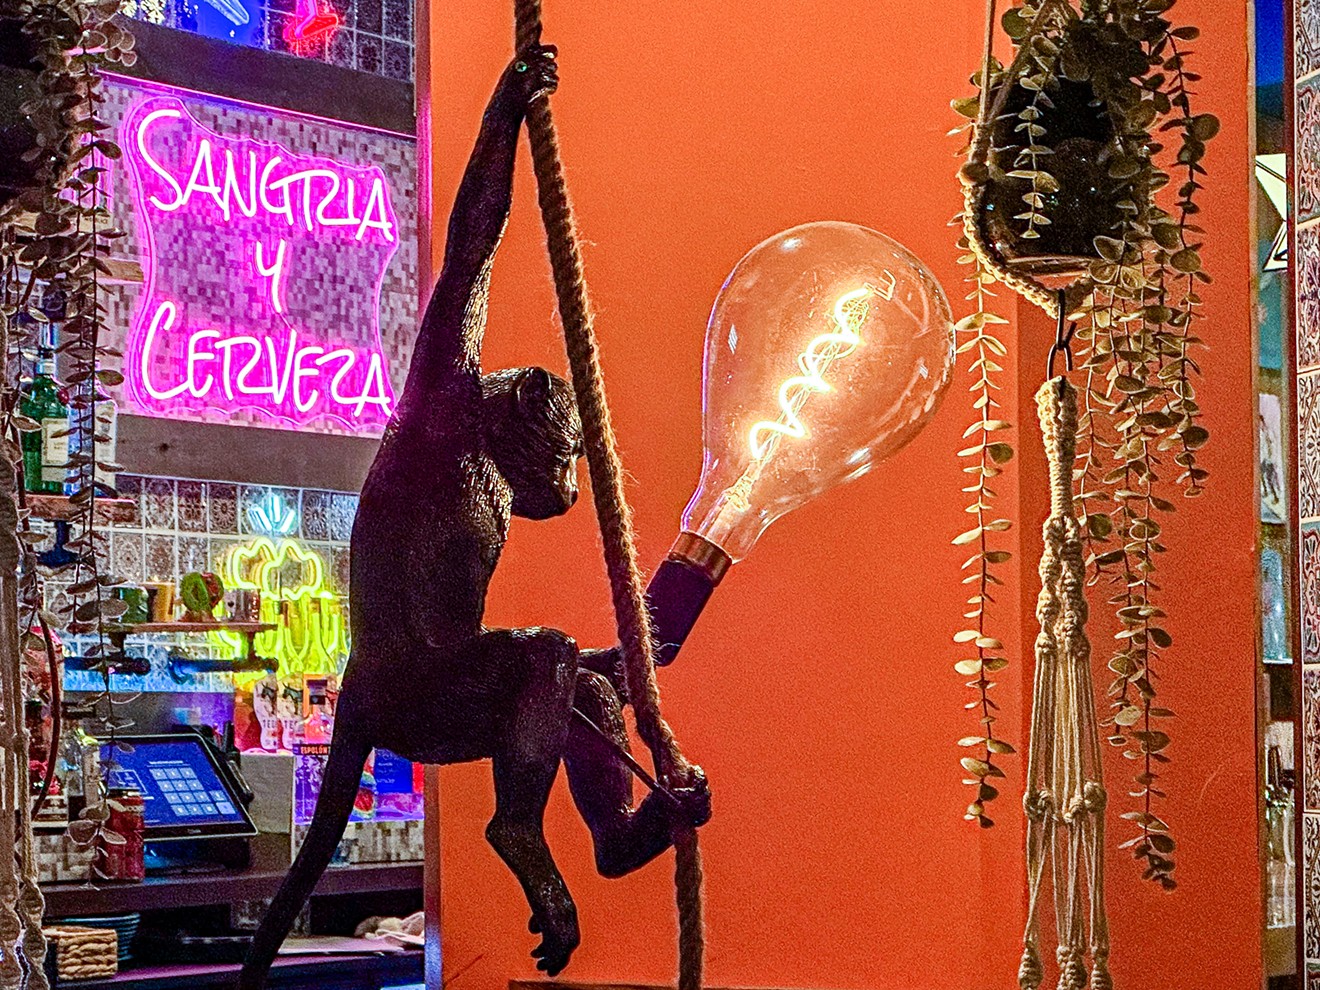 At Sangria y Cerveza in Plano, they aren't monkeying around.